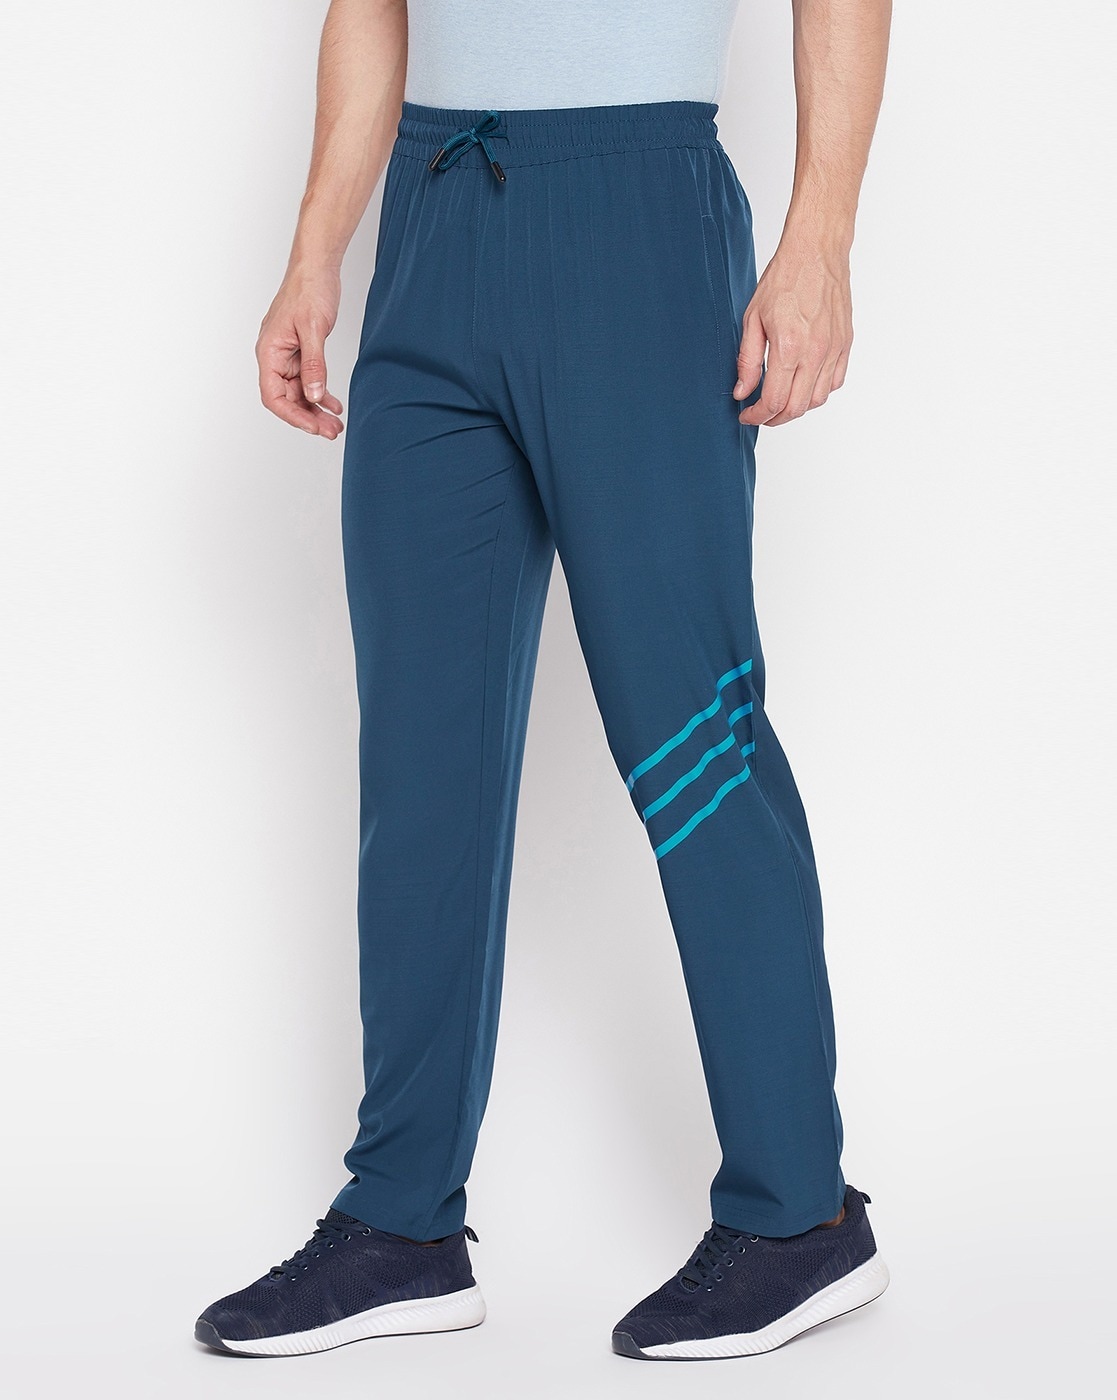 Buy Yellow Track Pants for Men by Free Authority Online | Ajio.com